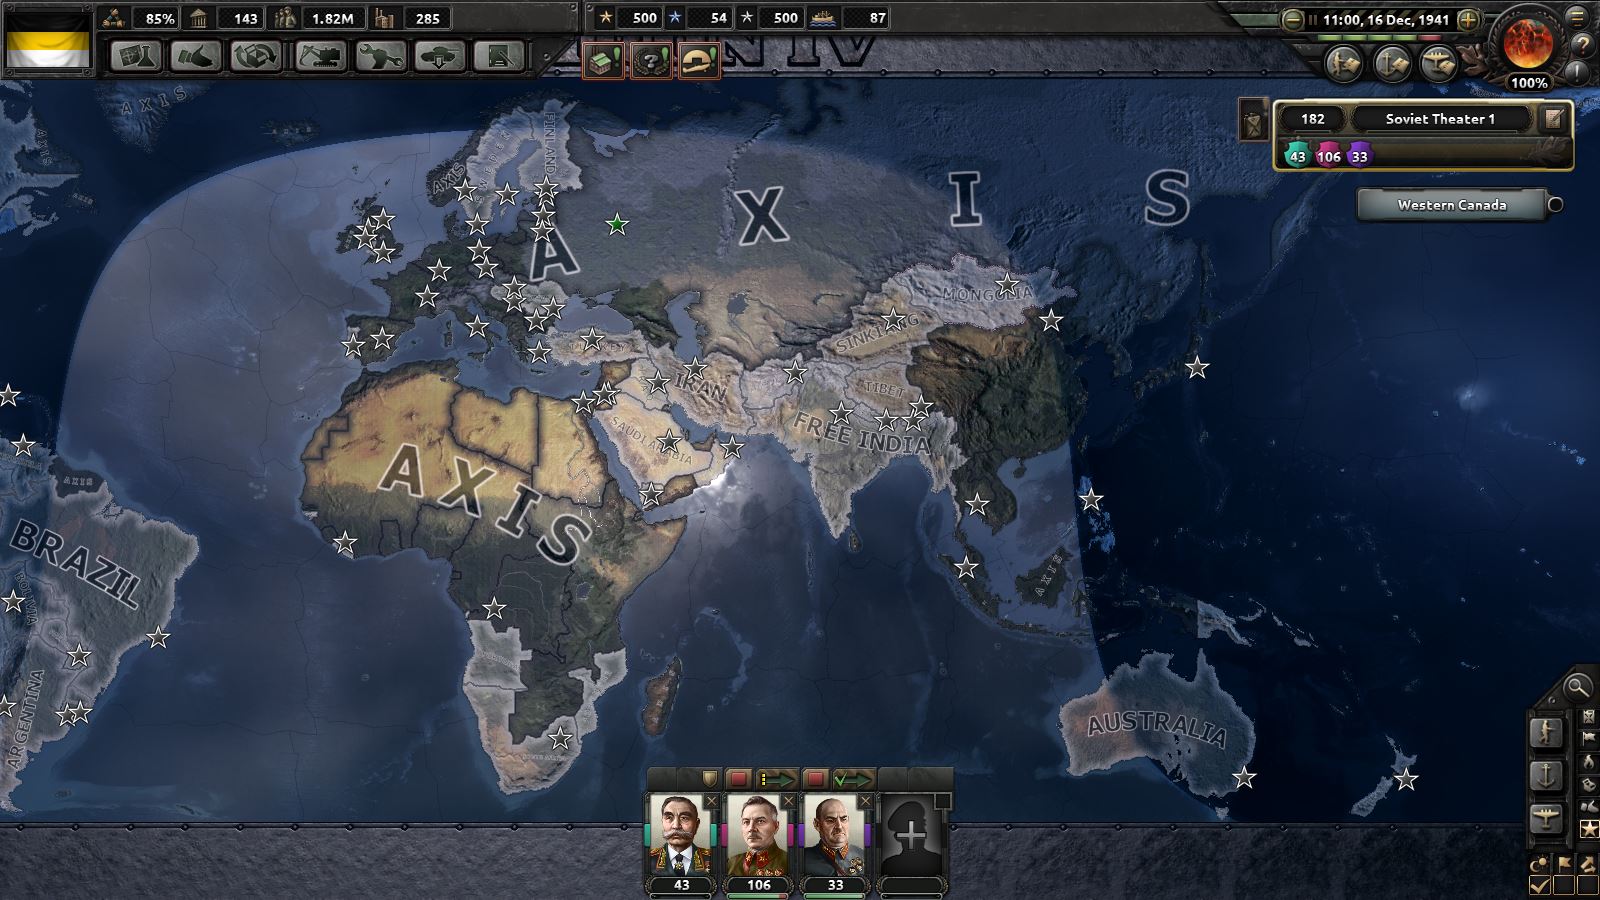 microcontrol helper mod for hearts of iron iv hoi4 mods.